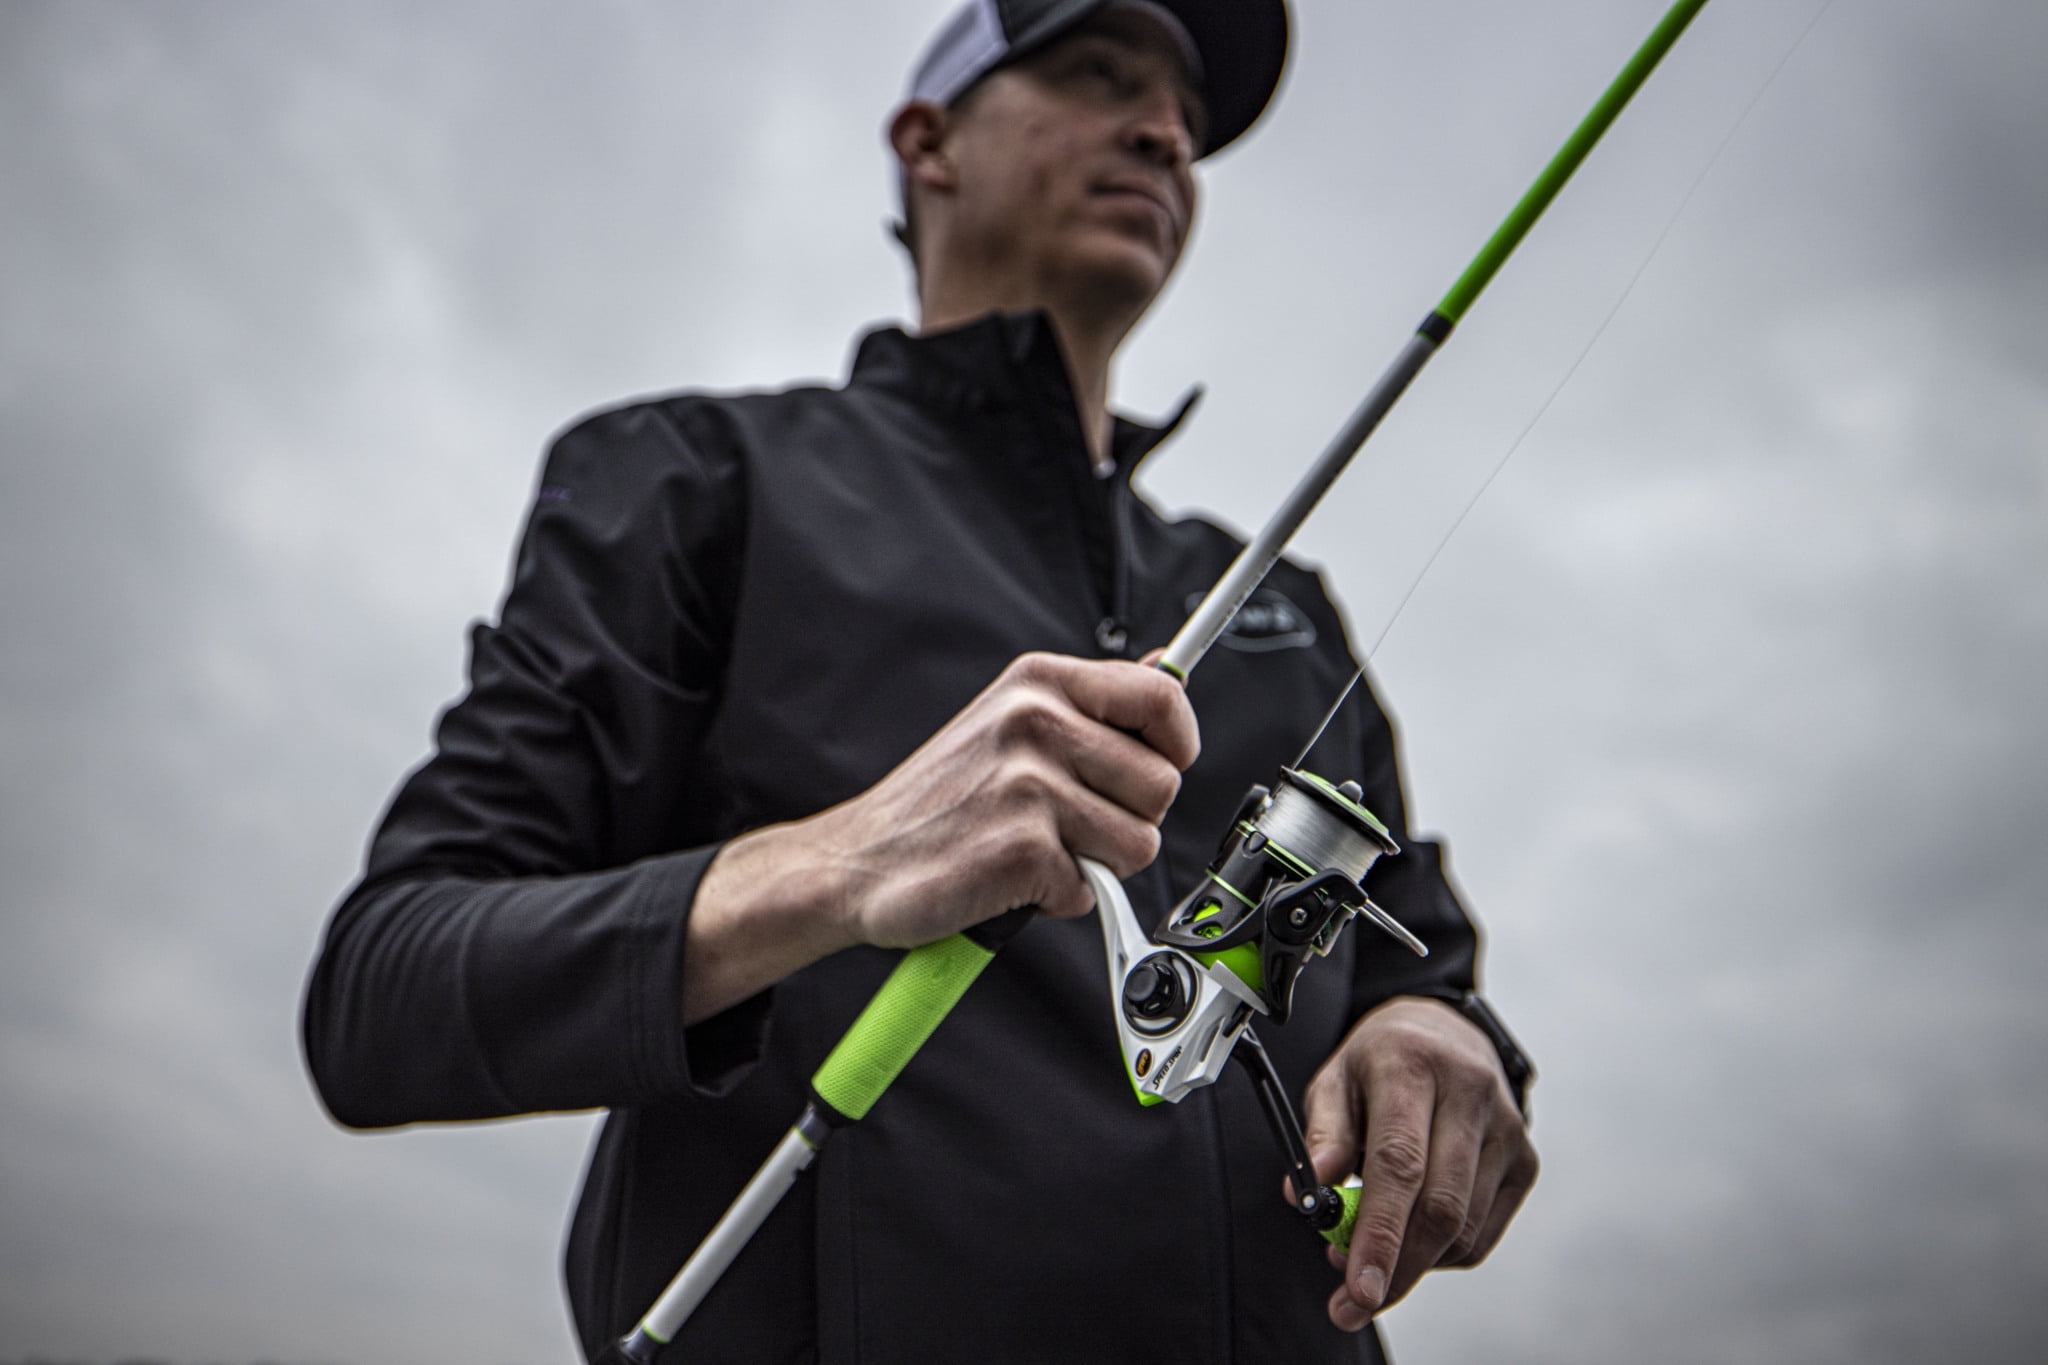 Lew's Xfinity Spinning Combo features a 6-foot 6-inch spinning rod with a  split-grip rod handle. Features a bold greene and black color combination.  